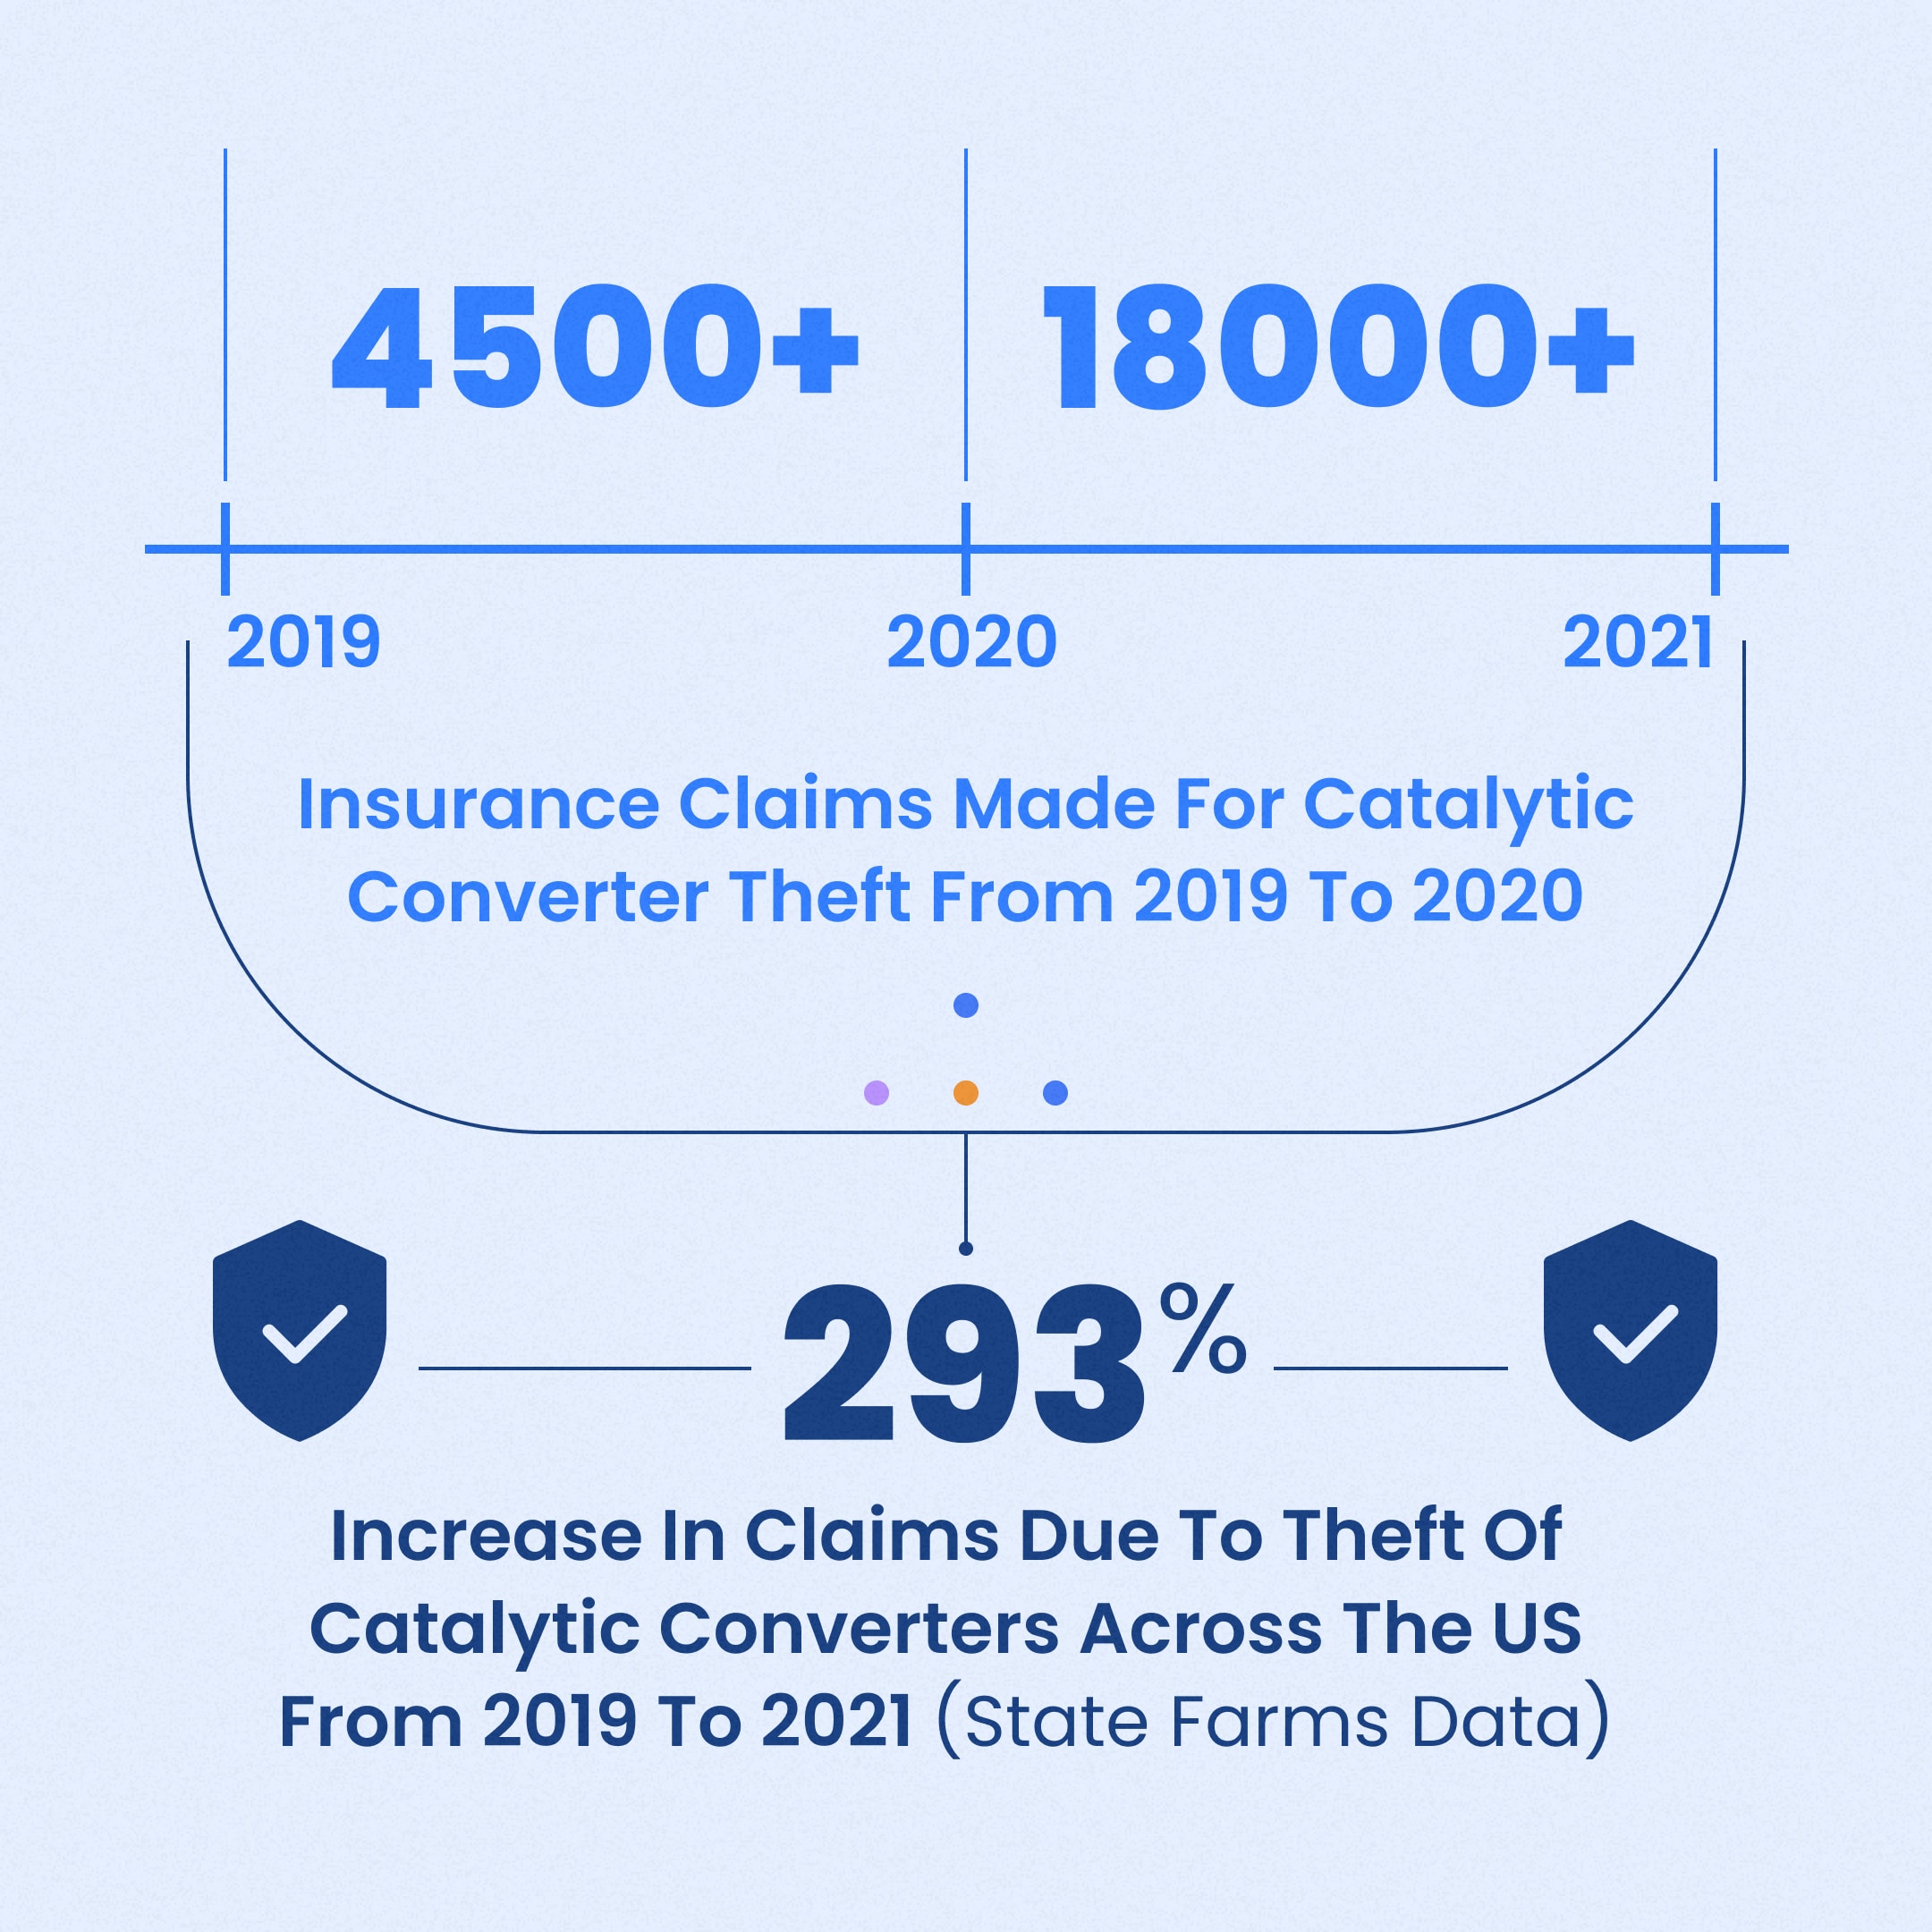 ccording to State Farms data, more than 4500 insurance claims were made for the theft of catalytic converters from 2019 To 2020, but by 2021, this number increased to more than 18000 claims, with an increase of 293%.